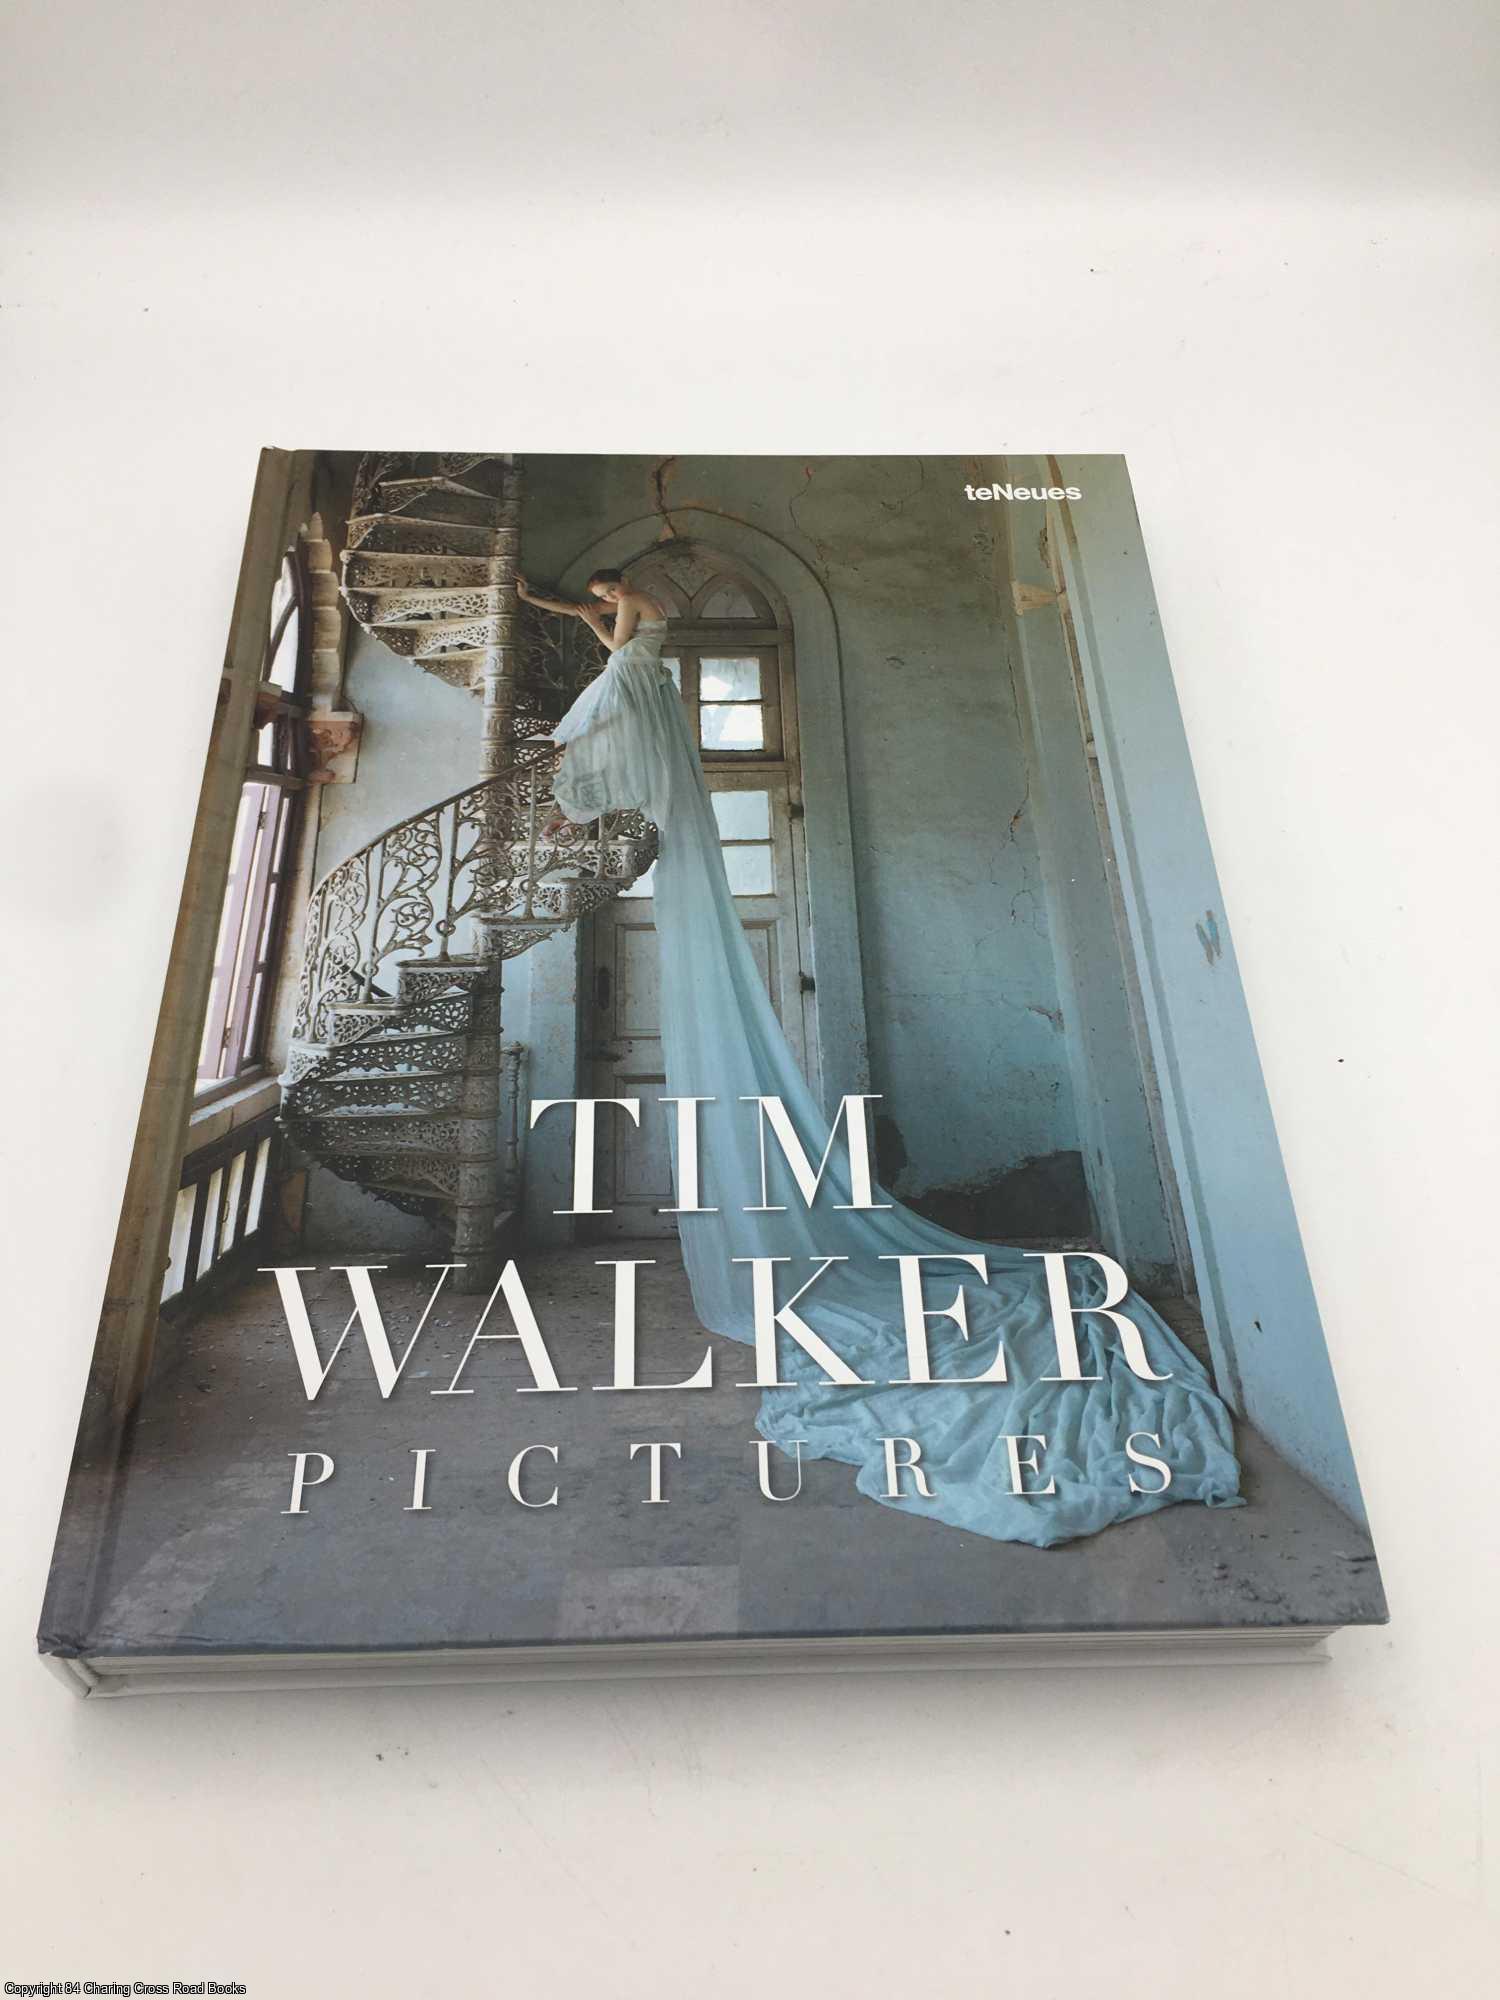 Pictures by Tim Walker on 84 Charing Cross Rare Books